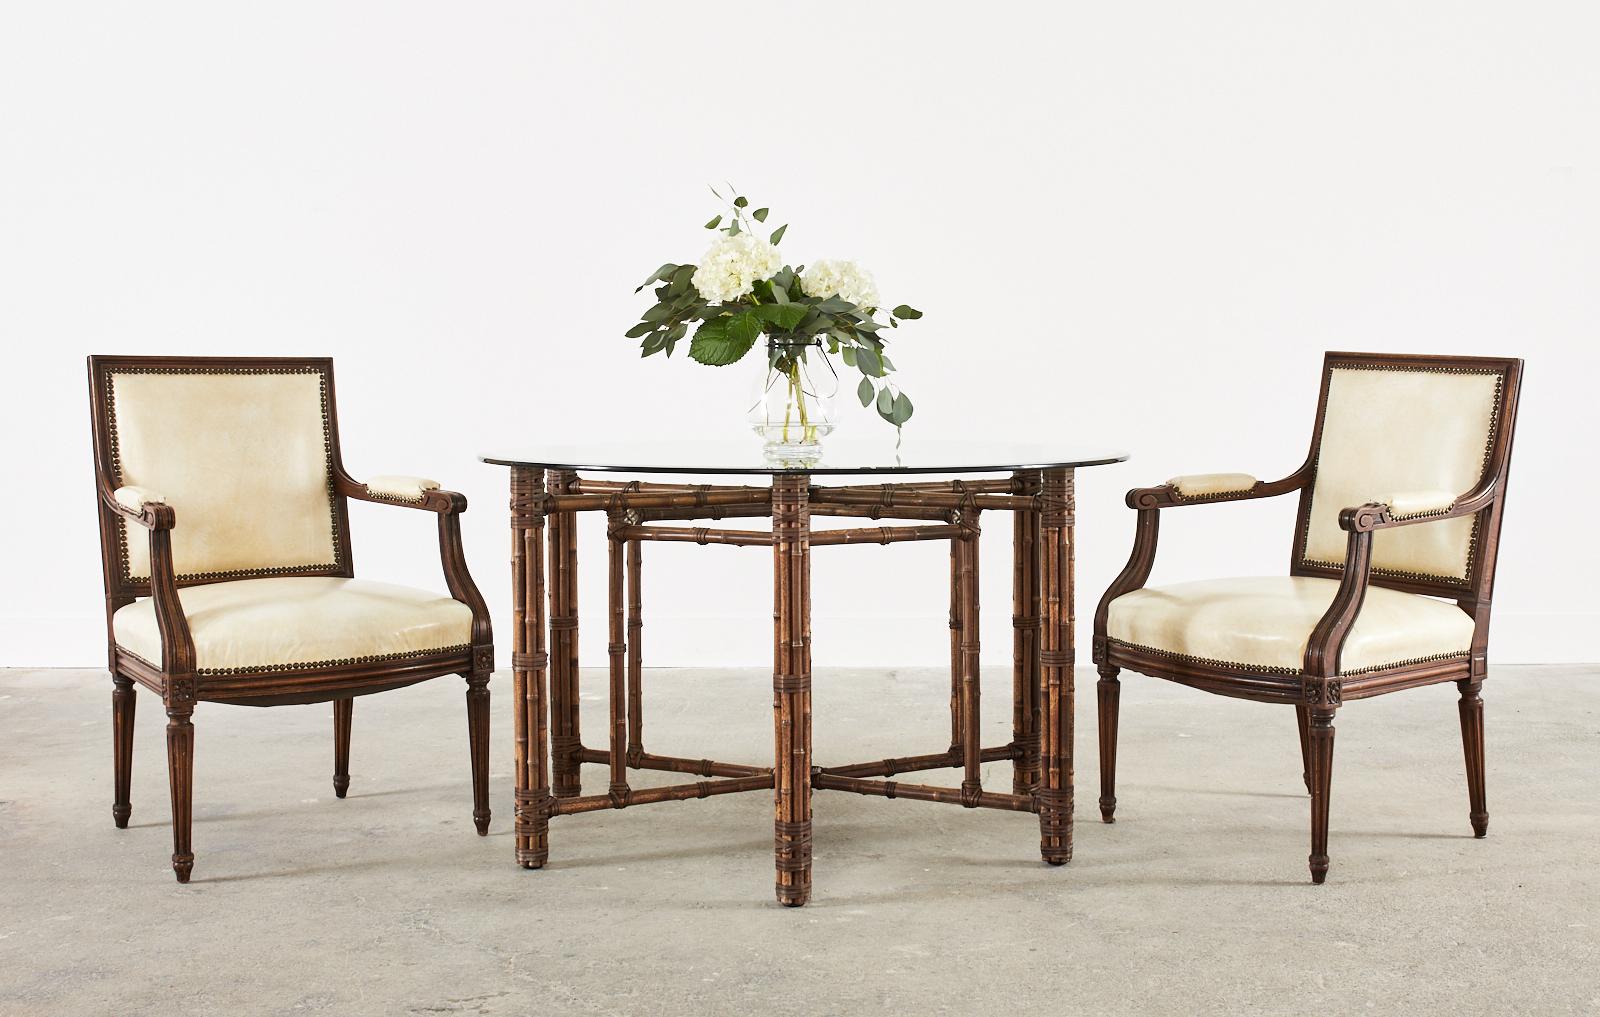 Magnificent set of four mahogany dining armchairs hand-crafted for the historic 19th century City of Paris department store in San Francisco, CA. Beautifully constructed in the grand French Louis XVI taste featuring hand carved frames with a